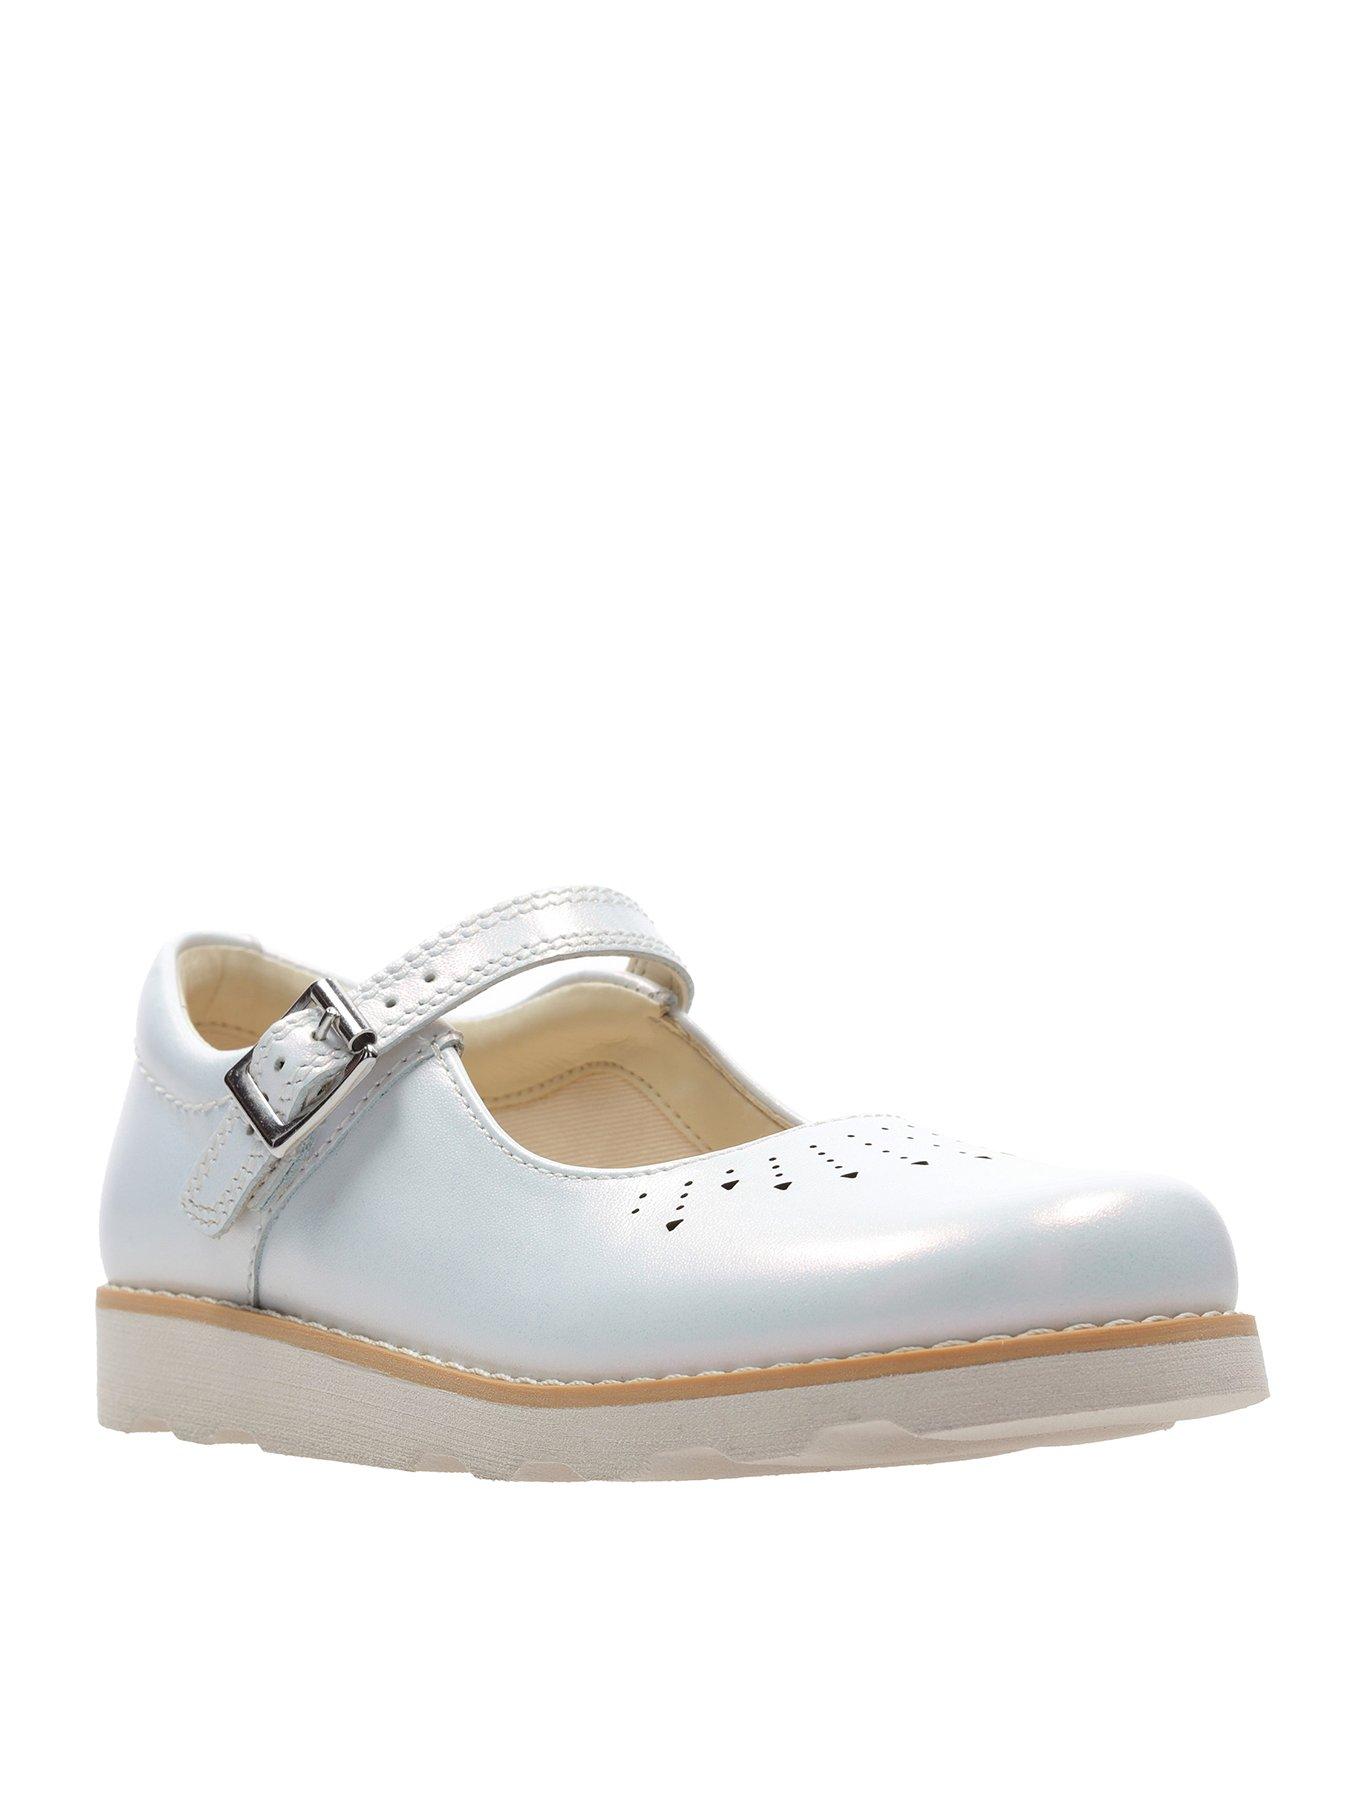 clarks childrens white shoes